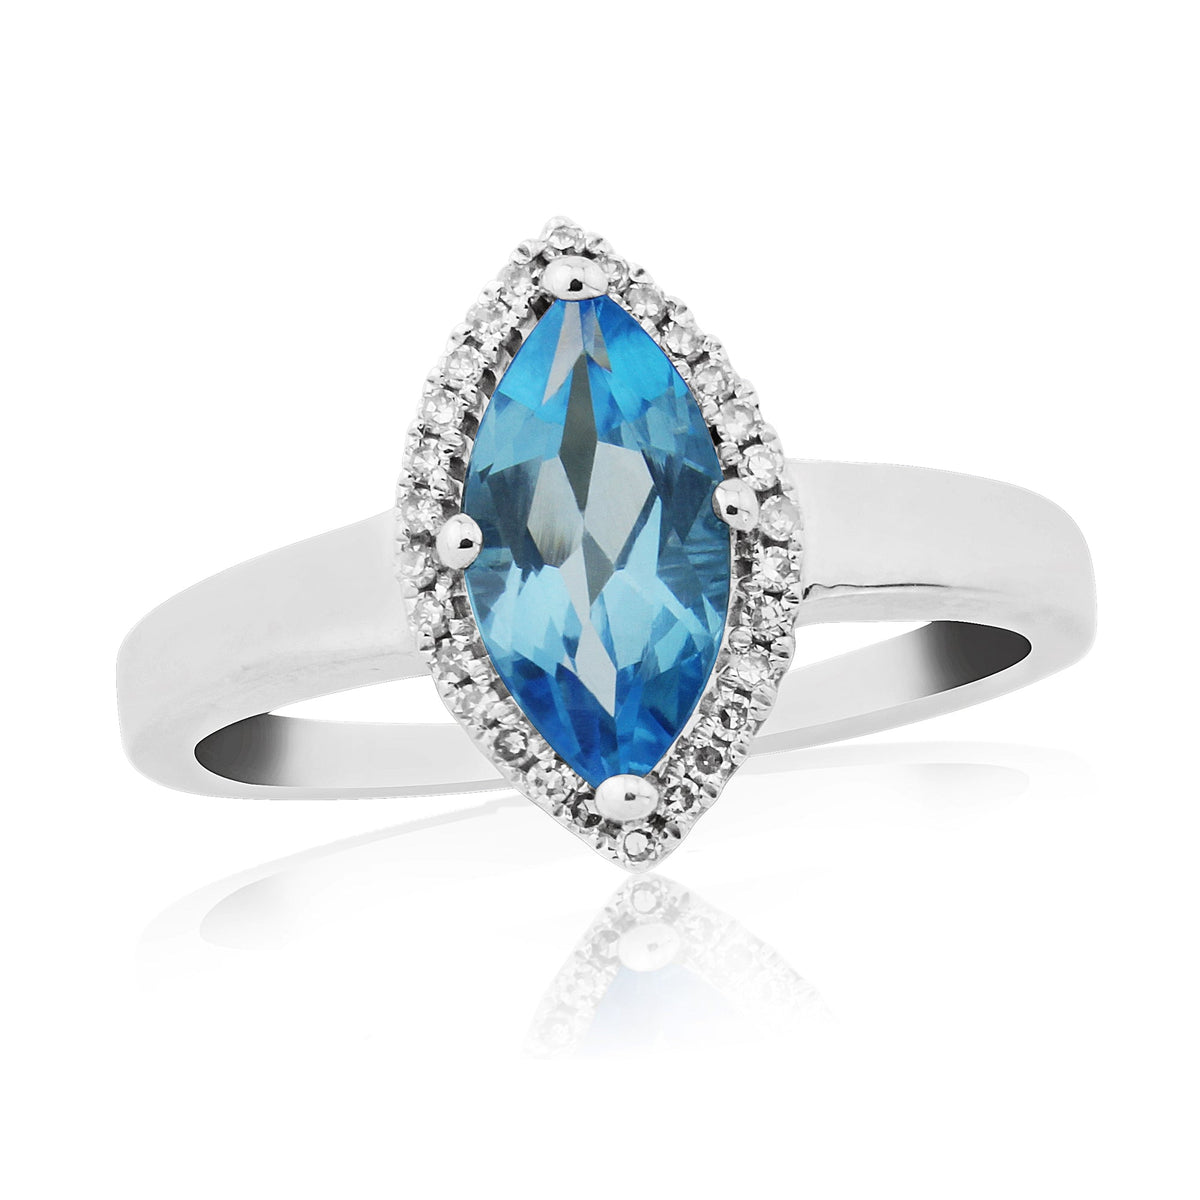 9ct white gold 10x5mm marquise shape blue topaz &amp; diamond cluster ring 0.11ct